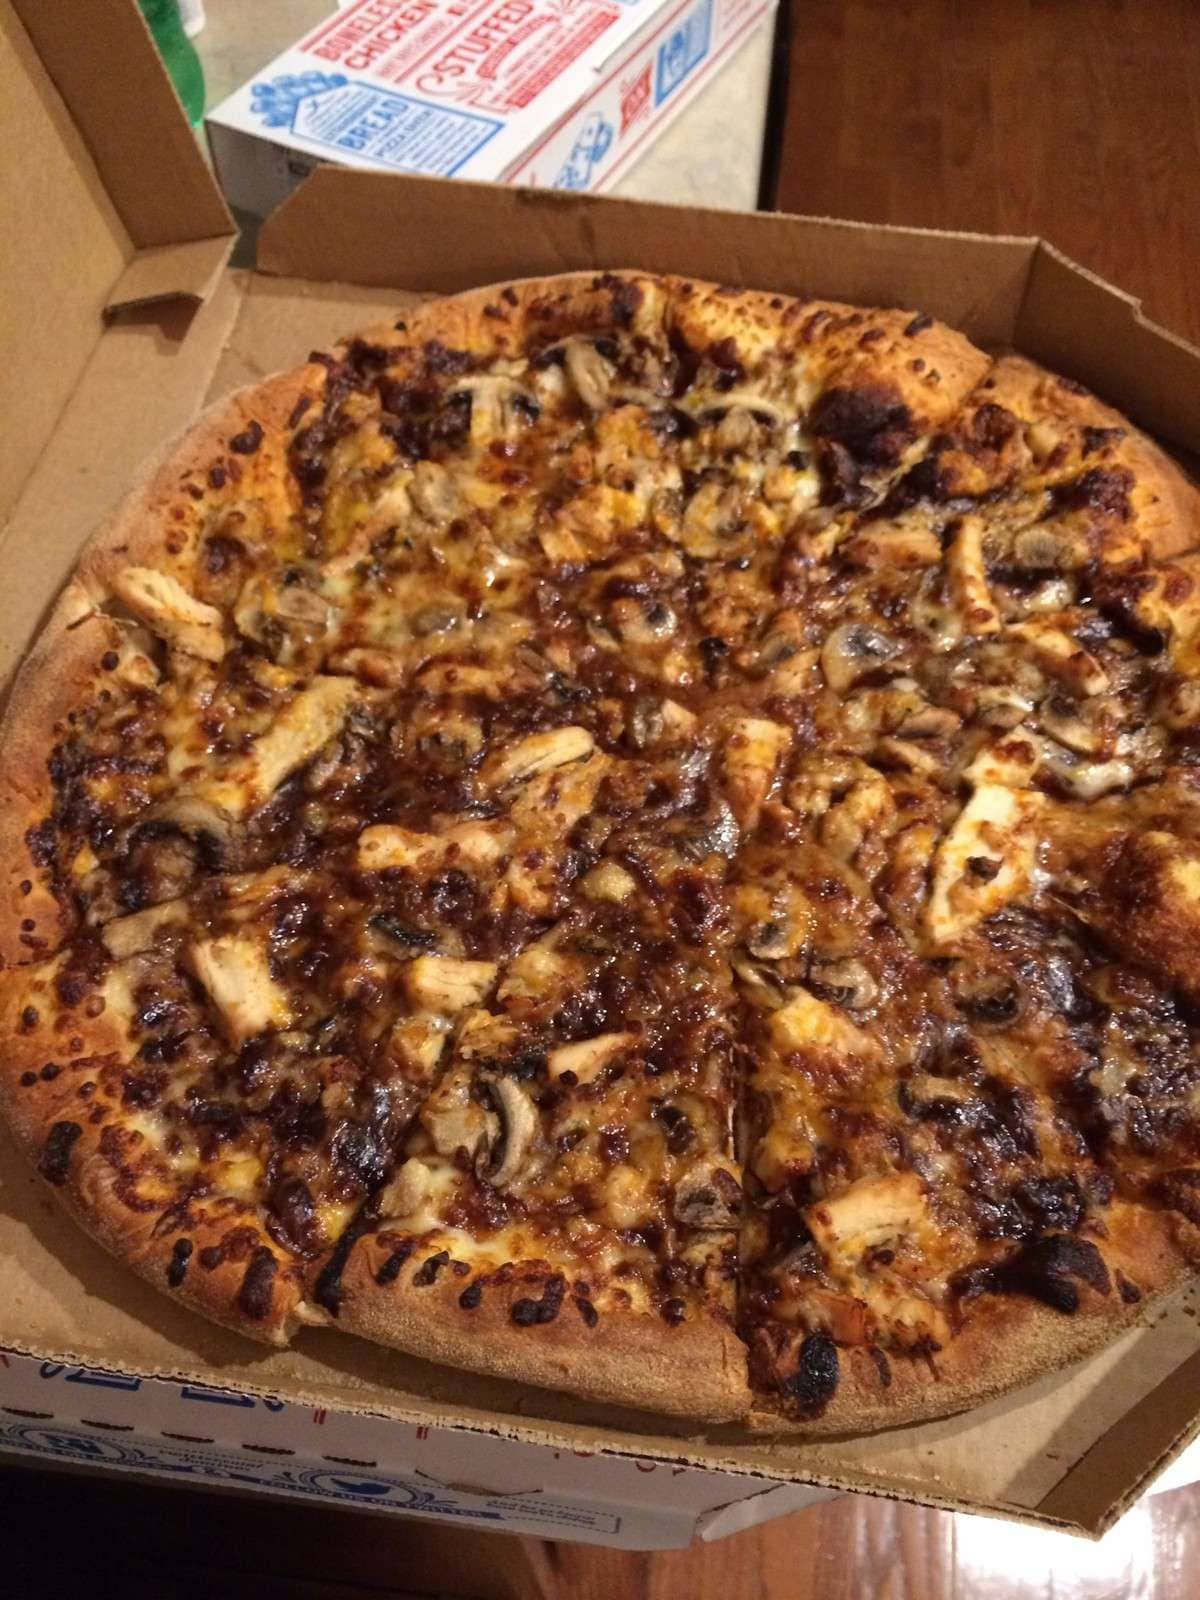 Bbq Chicken Pizza Dominos
 The 22 Best Ideas for Dominos Memphis Bbq Chicken Pizza